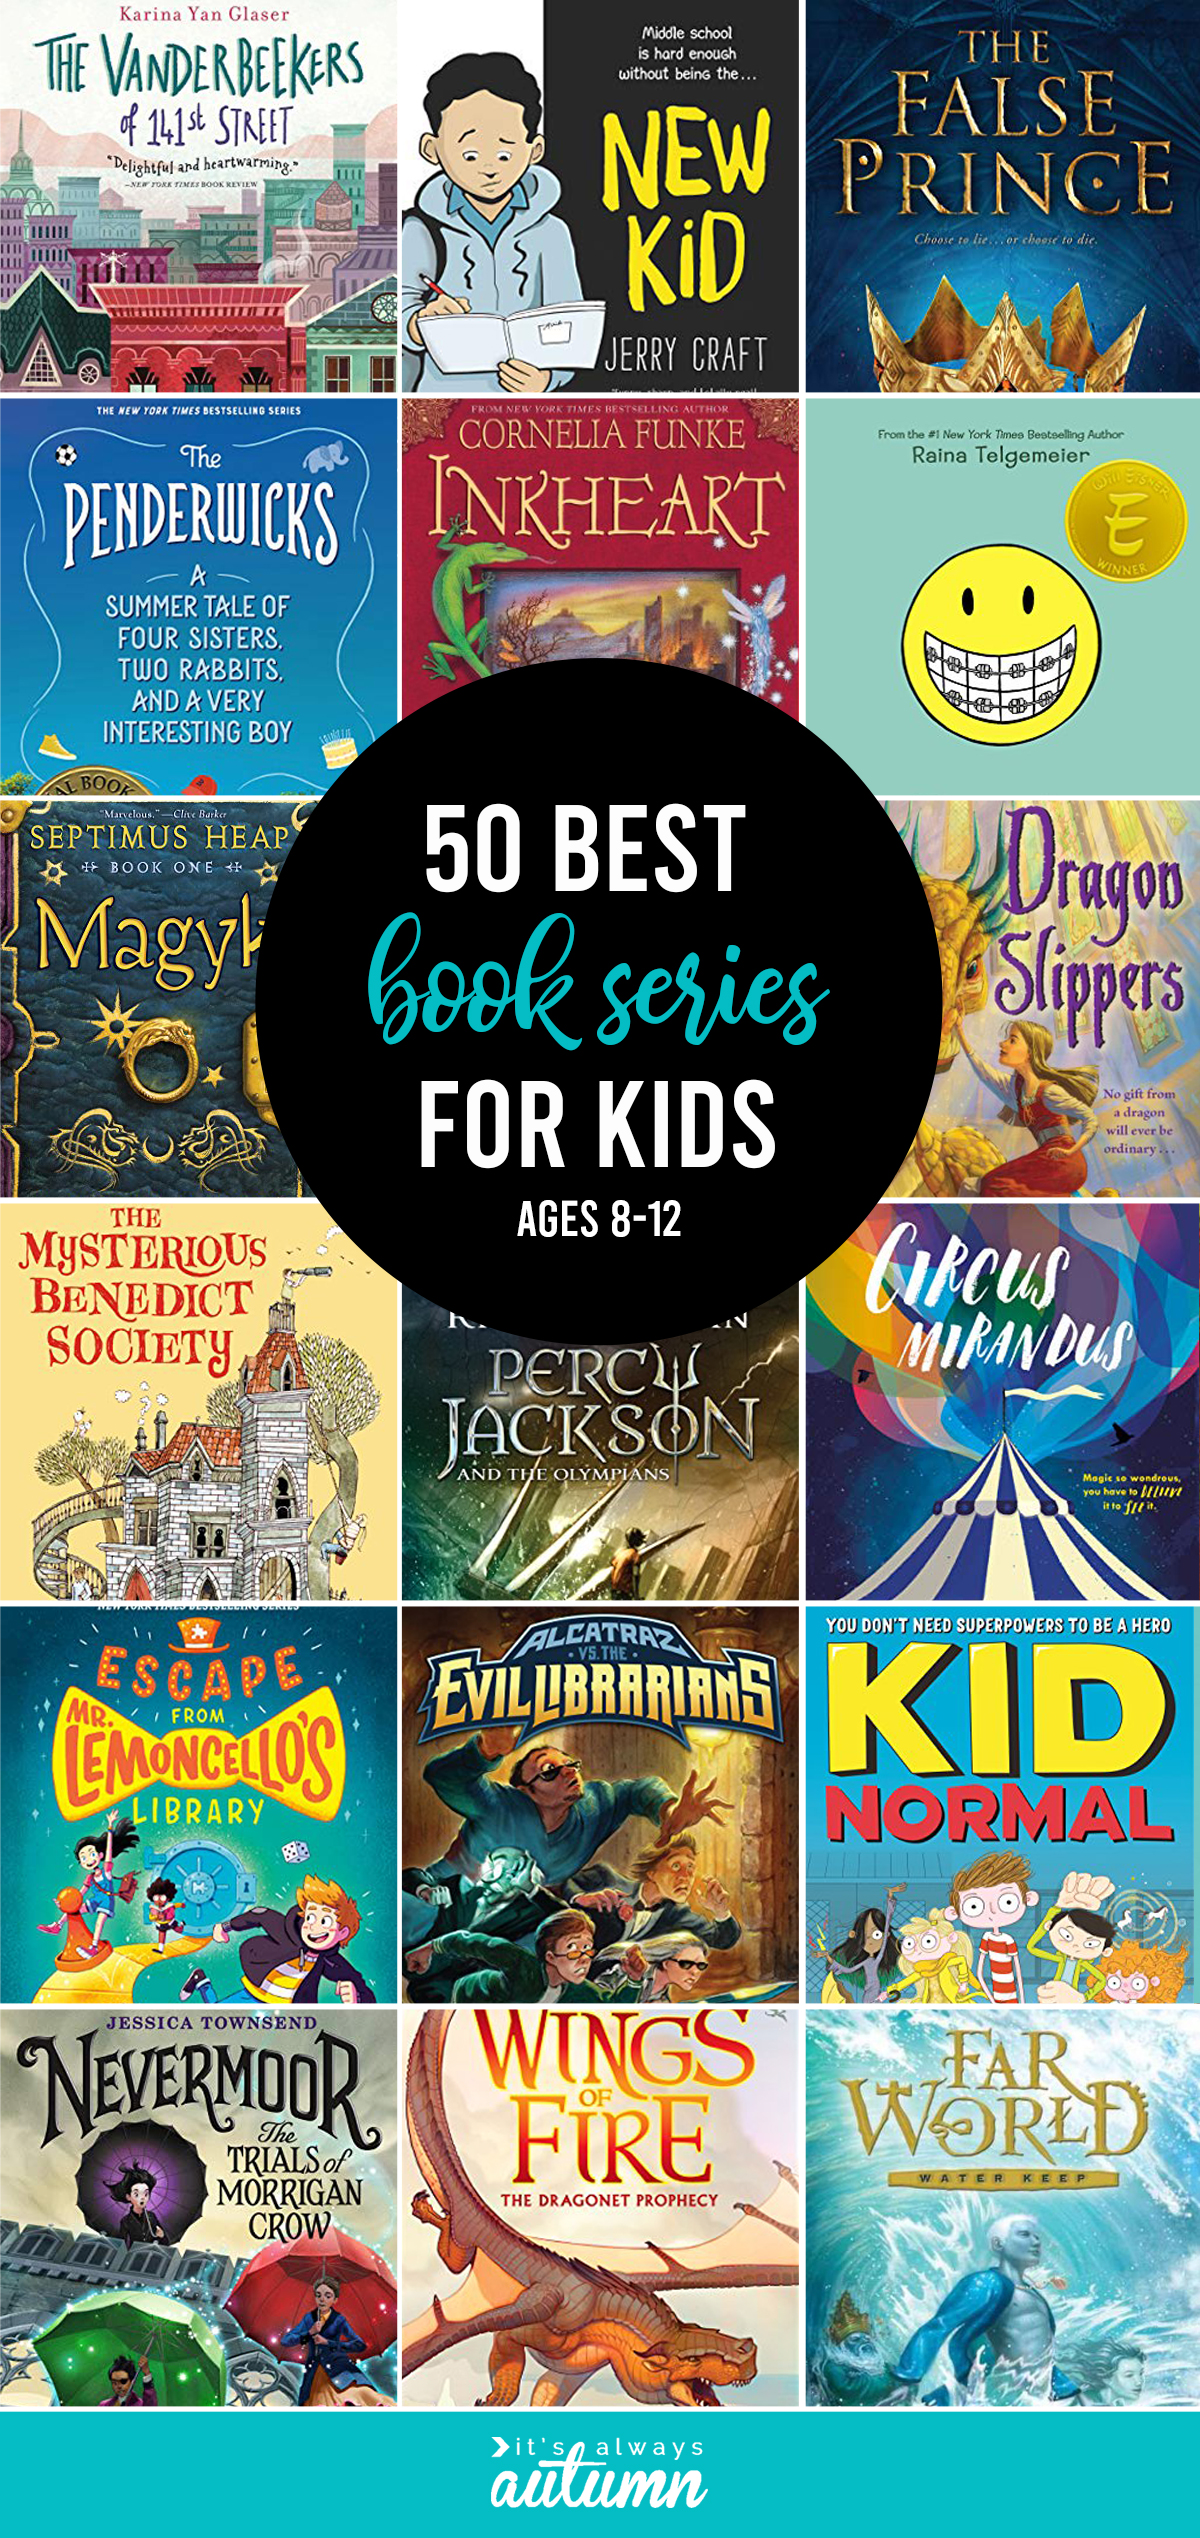 30 best book series for kids ages 8-12 summer reading list